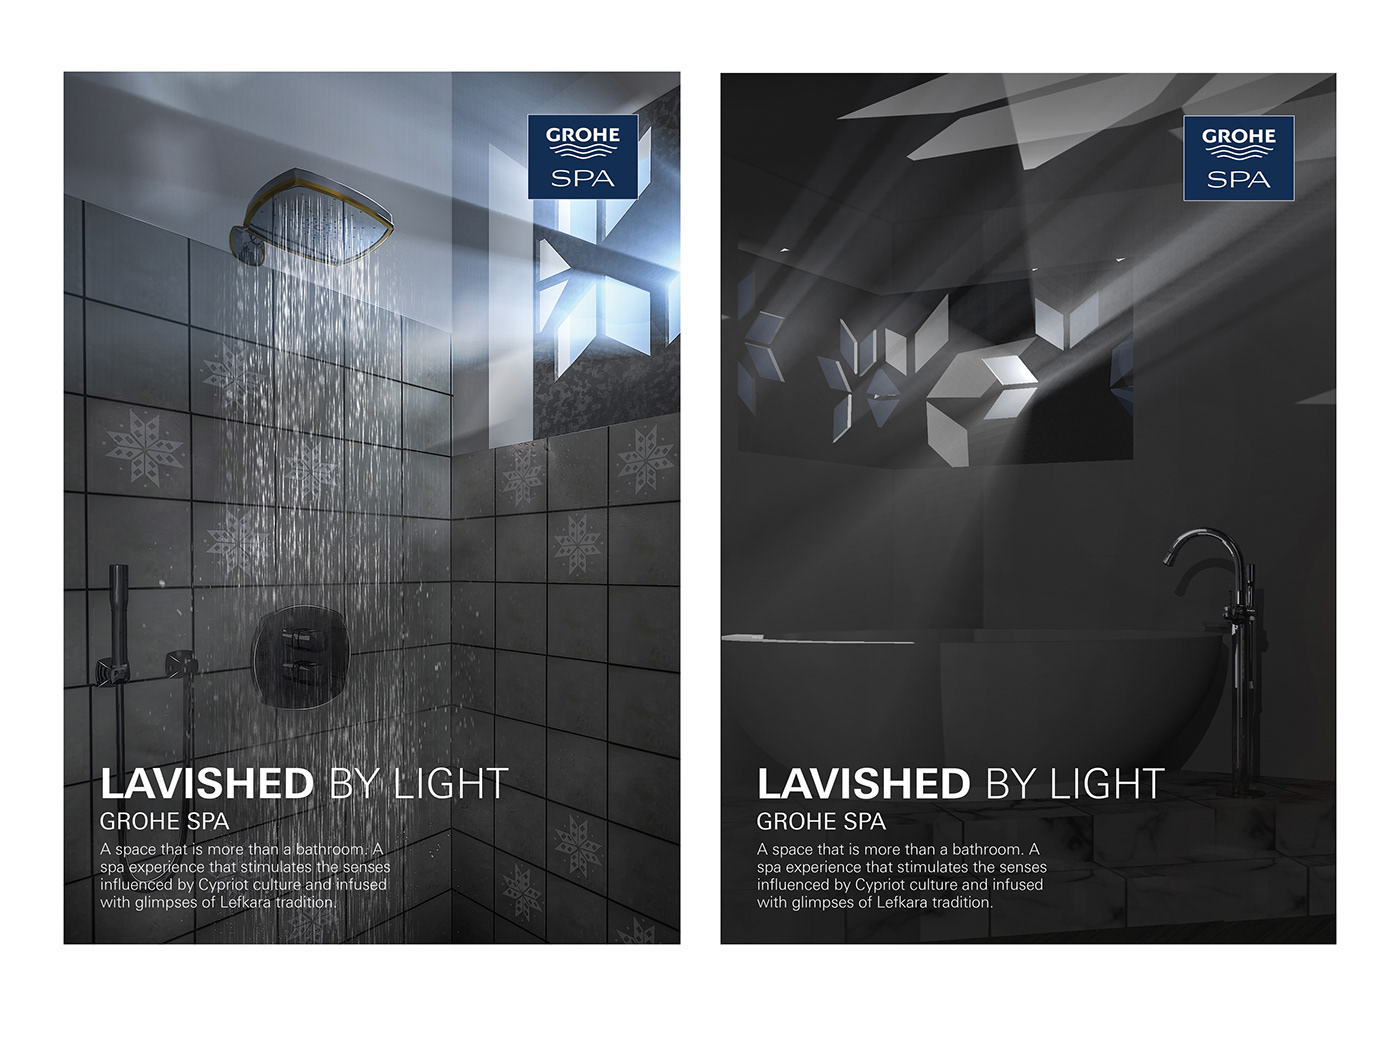 lefkara delight grohe design series lefkaritiko lace cyprus cypriot culture Spa private bathroom bathing experience Cultural Relevance grohe